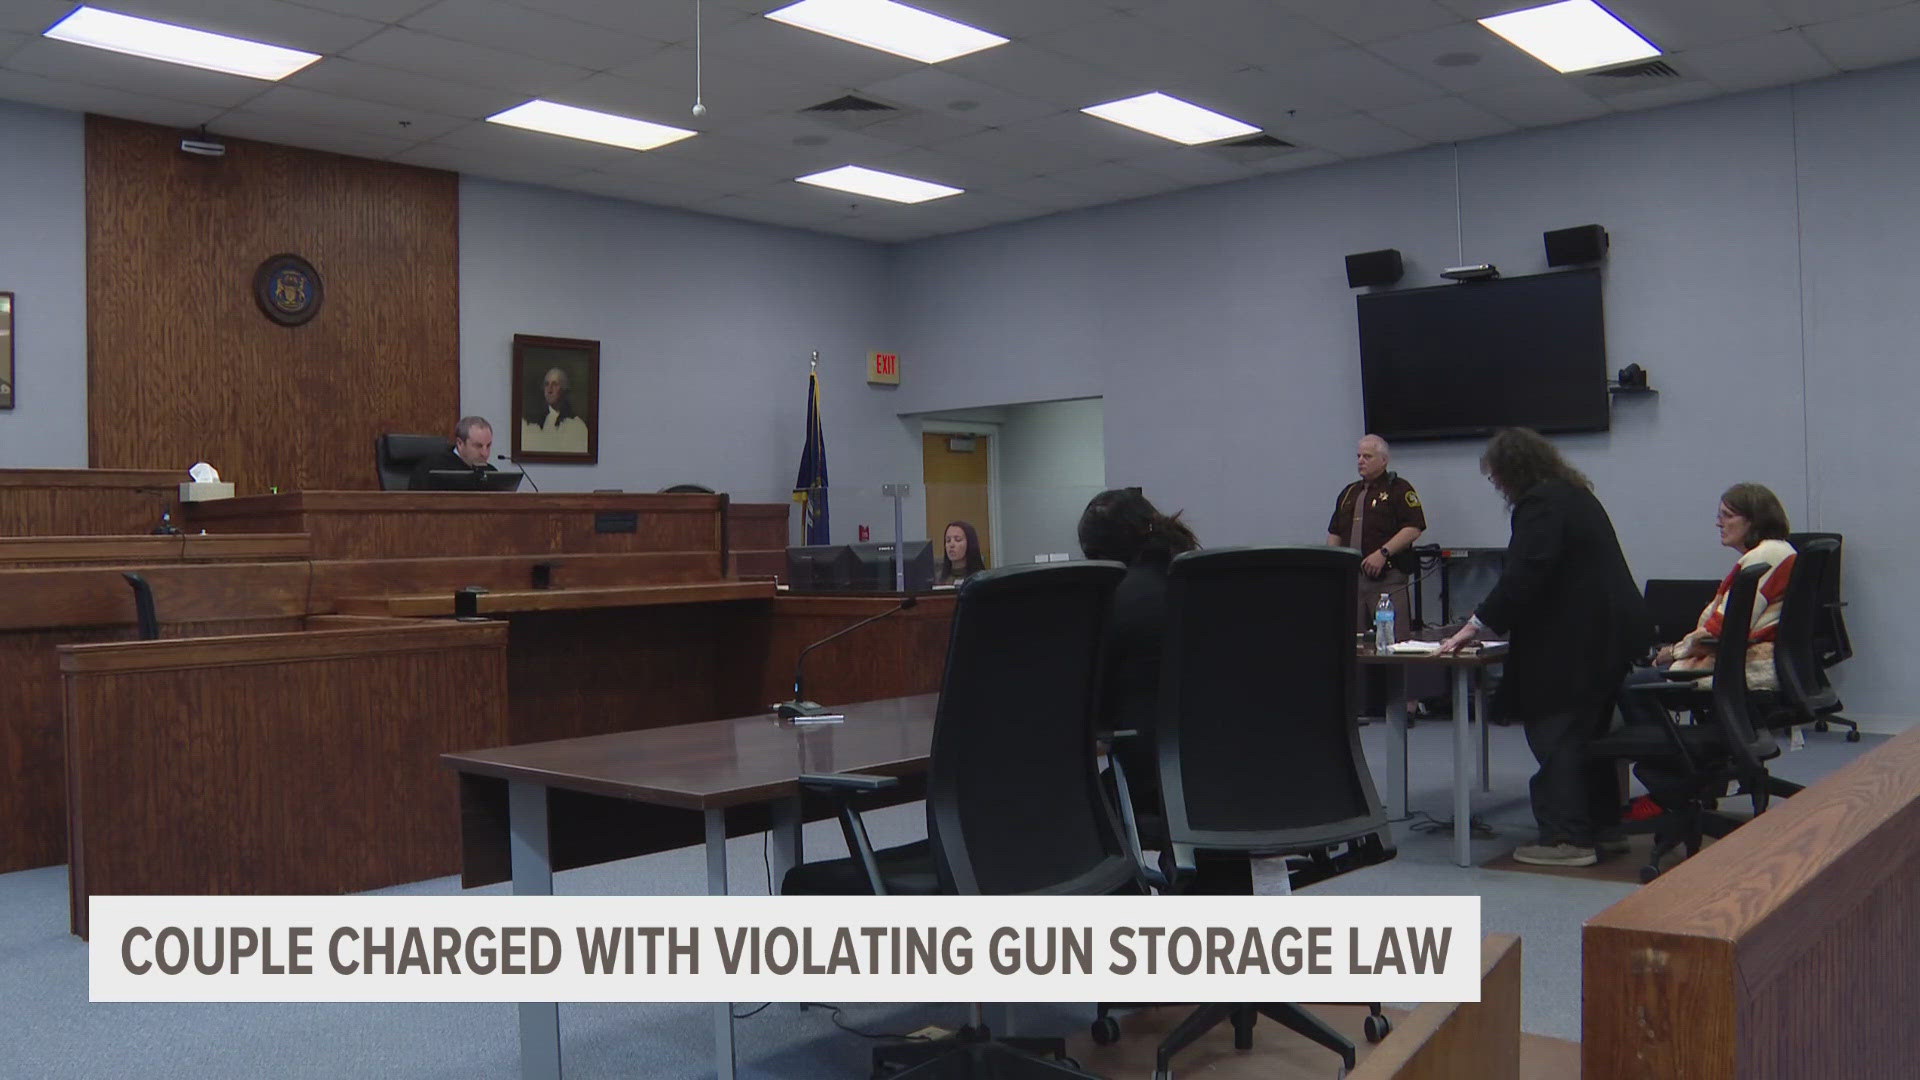 Both grandparents are expected to be arraigned in court Thursday for violating the firearms safe storage law with a minor present.